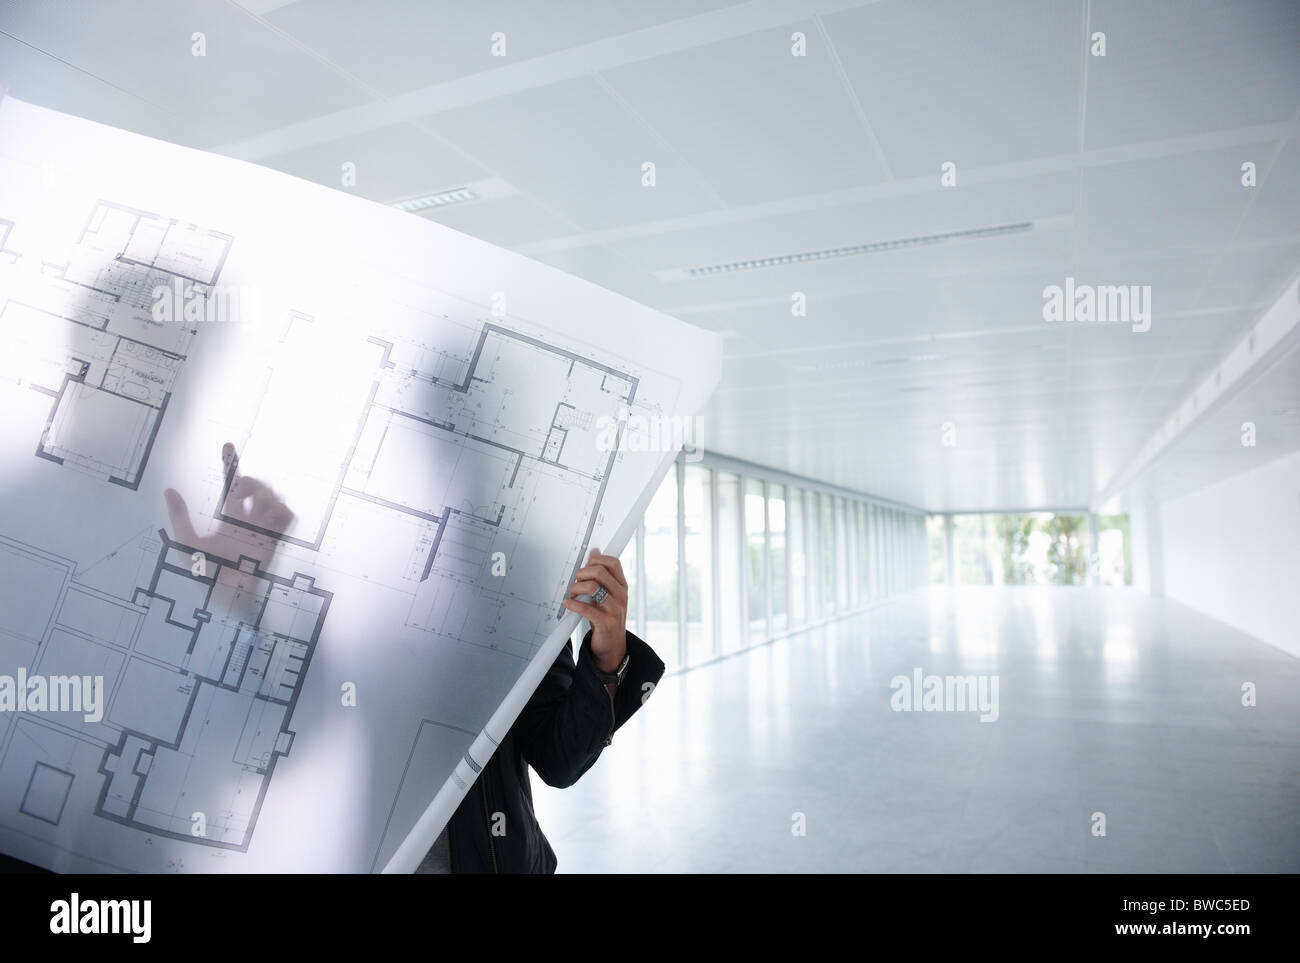 Architects looking at blue prints Stock Photo